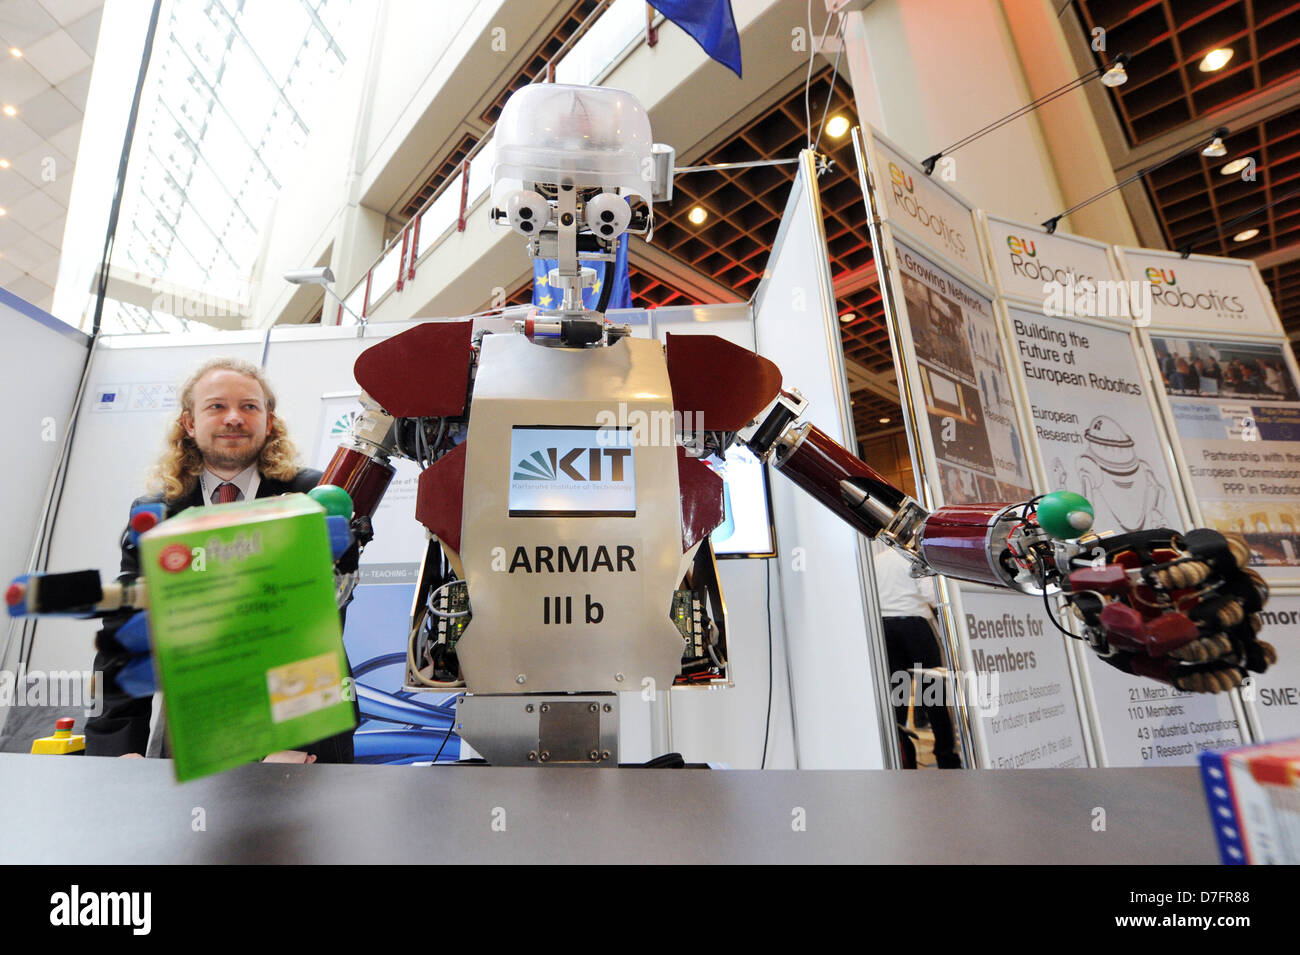 Karlsruhe, Germany. 7th May, 2013. The robot ARMAR III b of the Karlsruhe Institute for Technology KIT is presented at the International Conference on Robotics and Automation (ICRA) at the congress center in Karlsruhe, Germany, 07 May 2013. The annual academic conference covering advances in robotics takes place until 10 May. Photo: ULI DECK/dpa/Alamy Live News Stock Photo